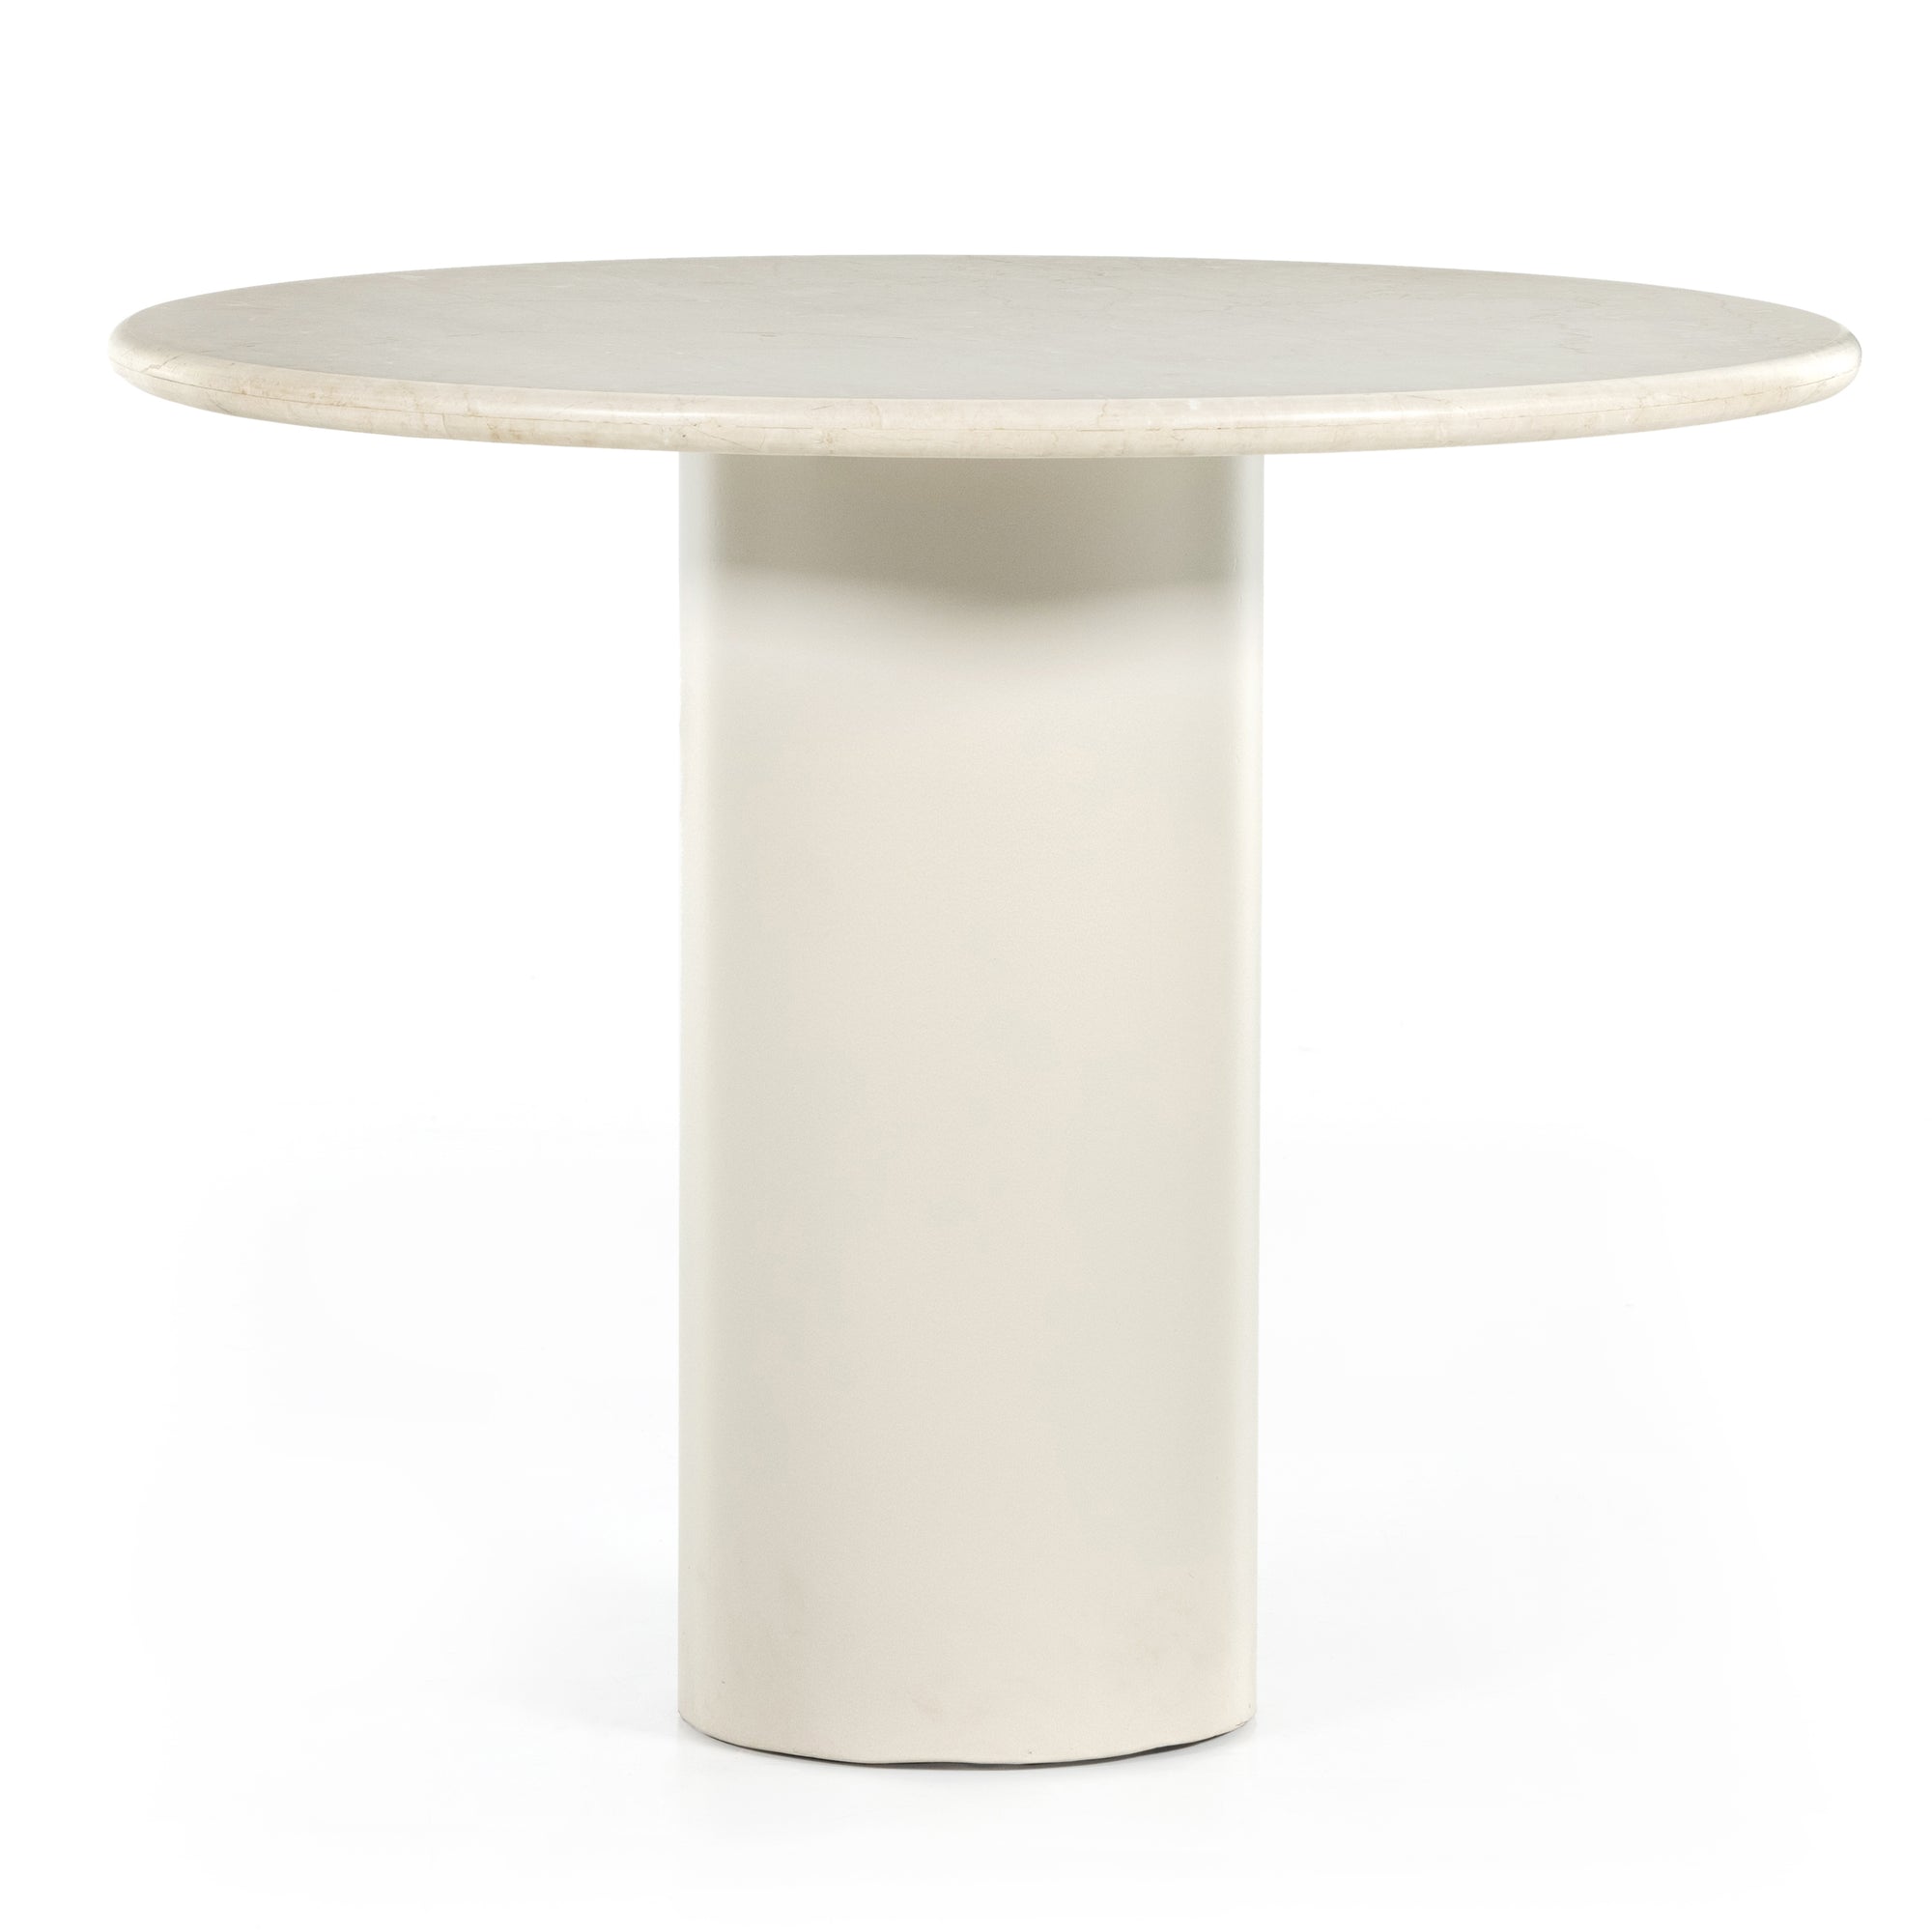 Beau Round Dining Table